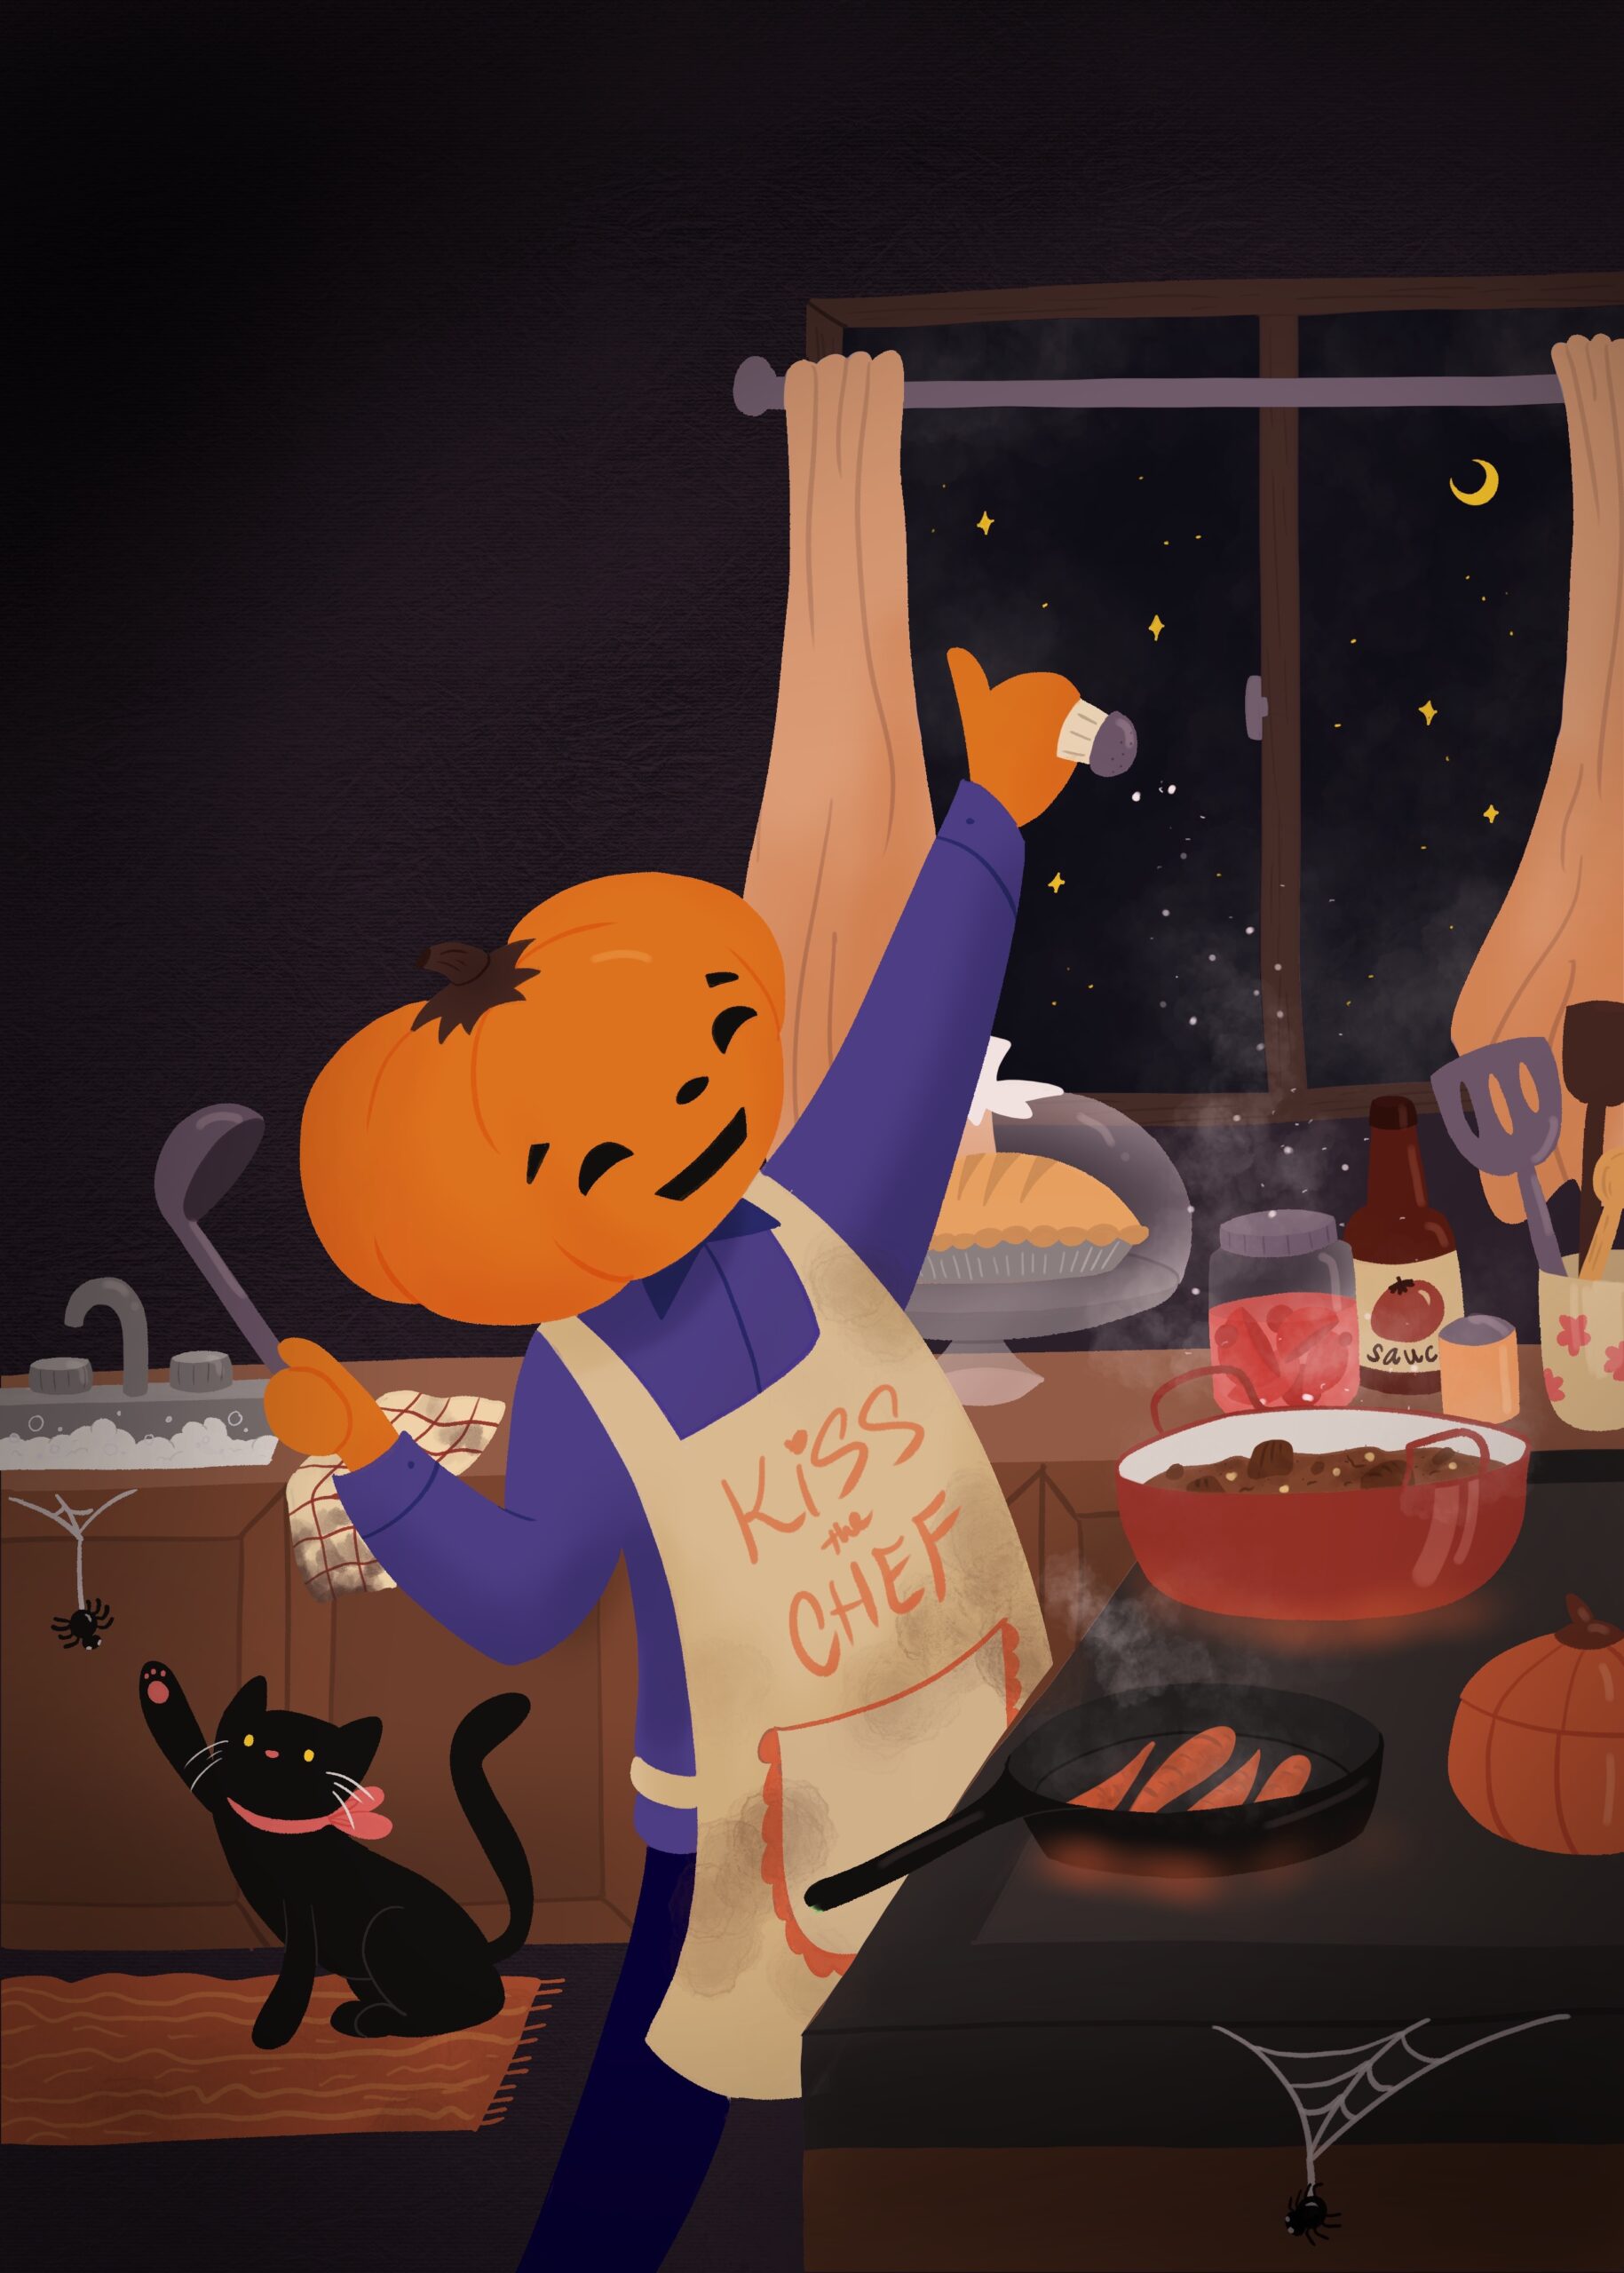 The scene is in a kitchen but it is spooky in a cute way. The background is purple and outside the window is a night sky. In the back left corner is a black cat swatting at a spider hanging off of a kitchen cabinet. In the centre of the picture is a person with a pumpkin head cooking something in the kitchen. They are reminiscent of that one dancing pumpkin gif that circulated a lot back in 2012 on Tumblr. The pumpkin is carved with a happy expression and they are wearing an apron that says “kiss the chef.”